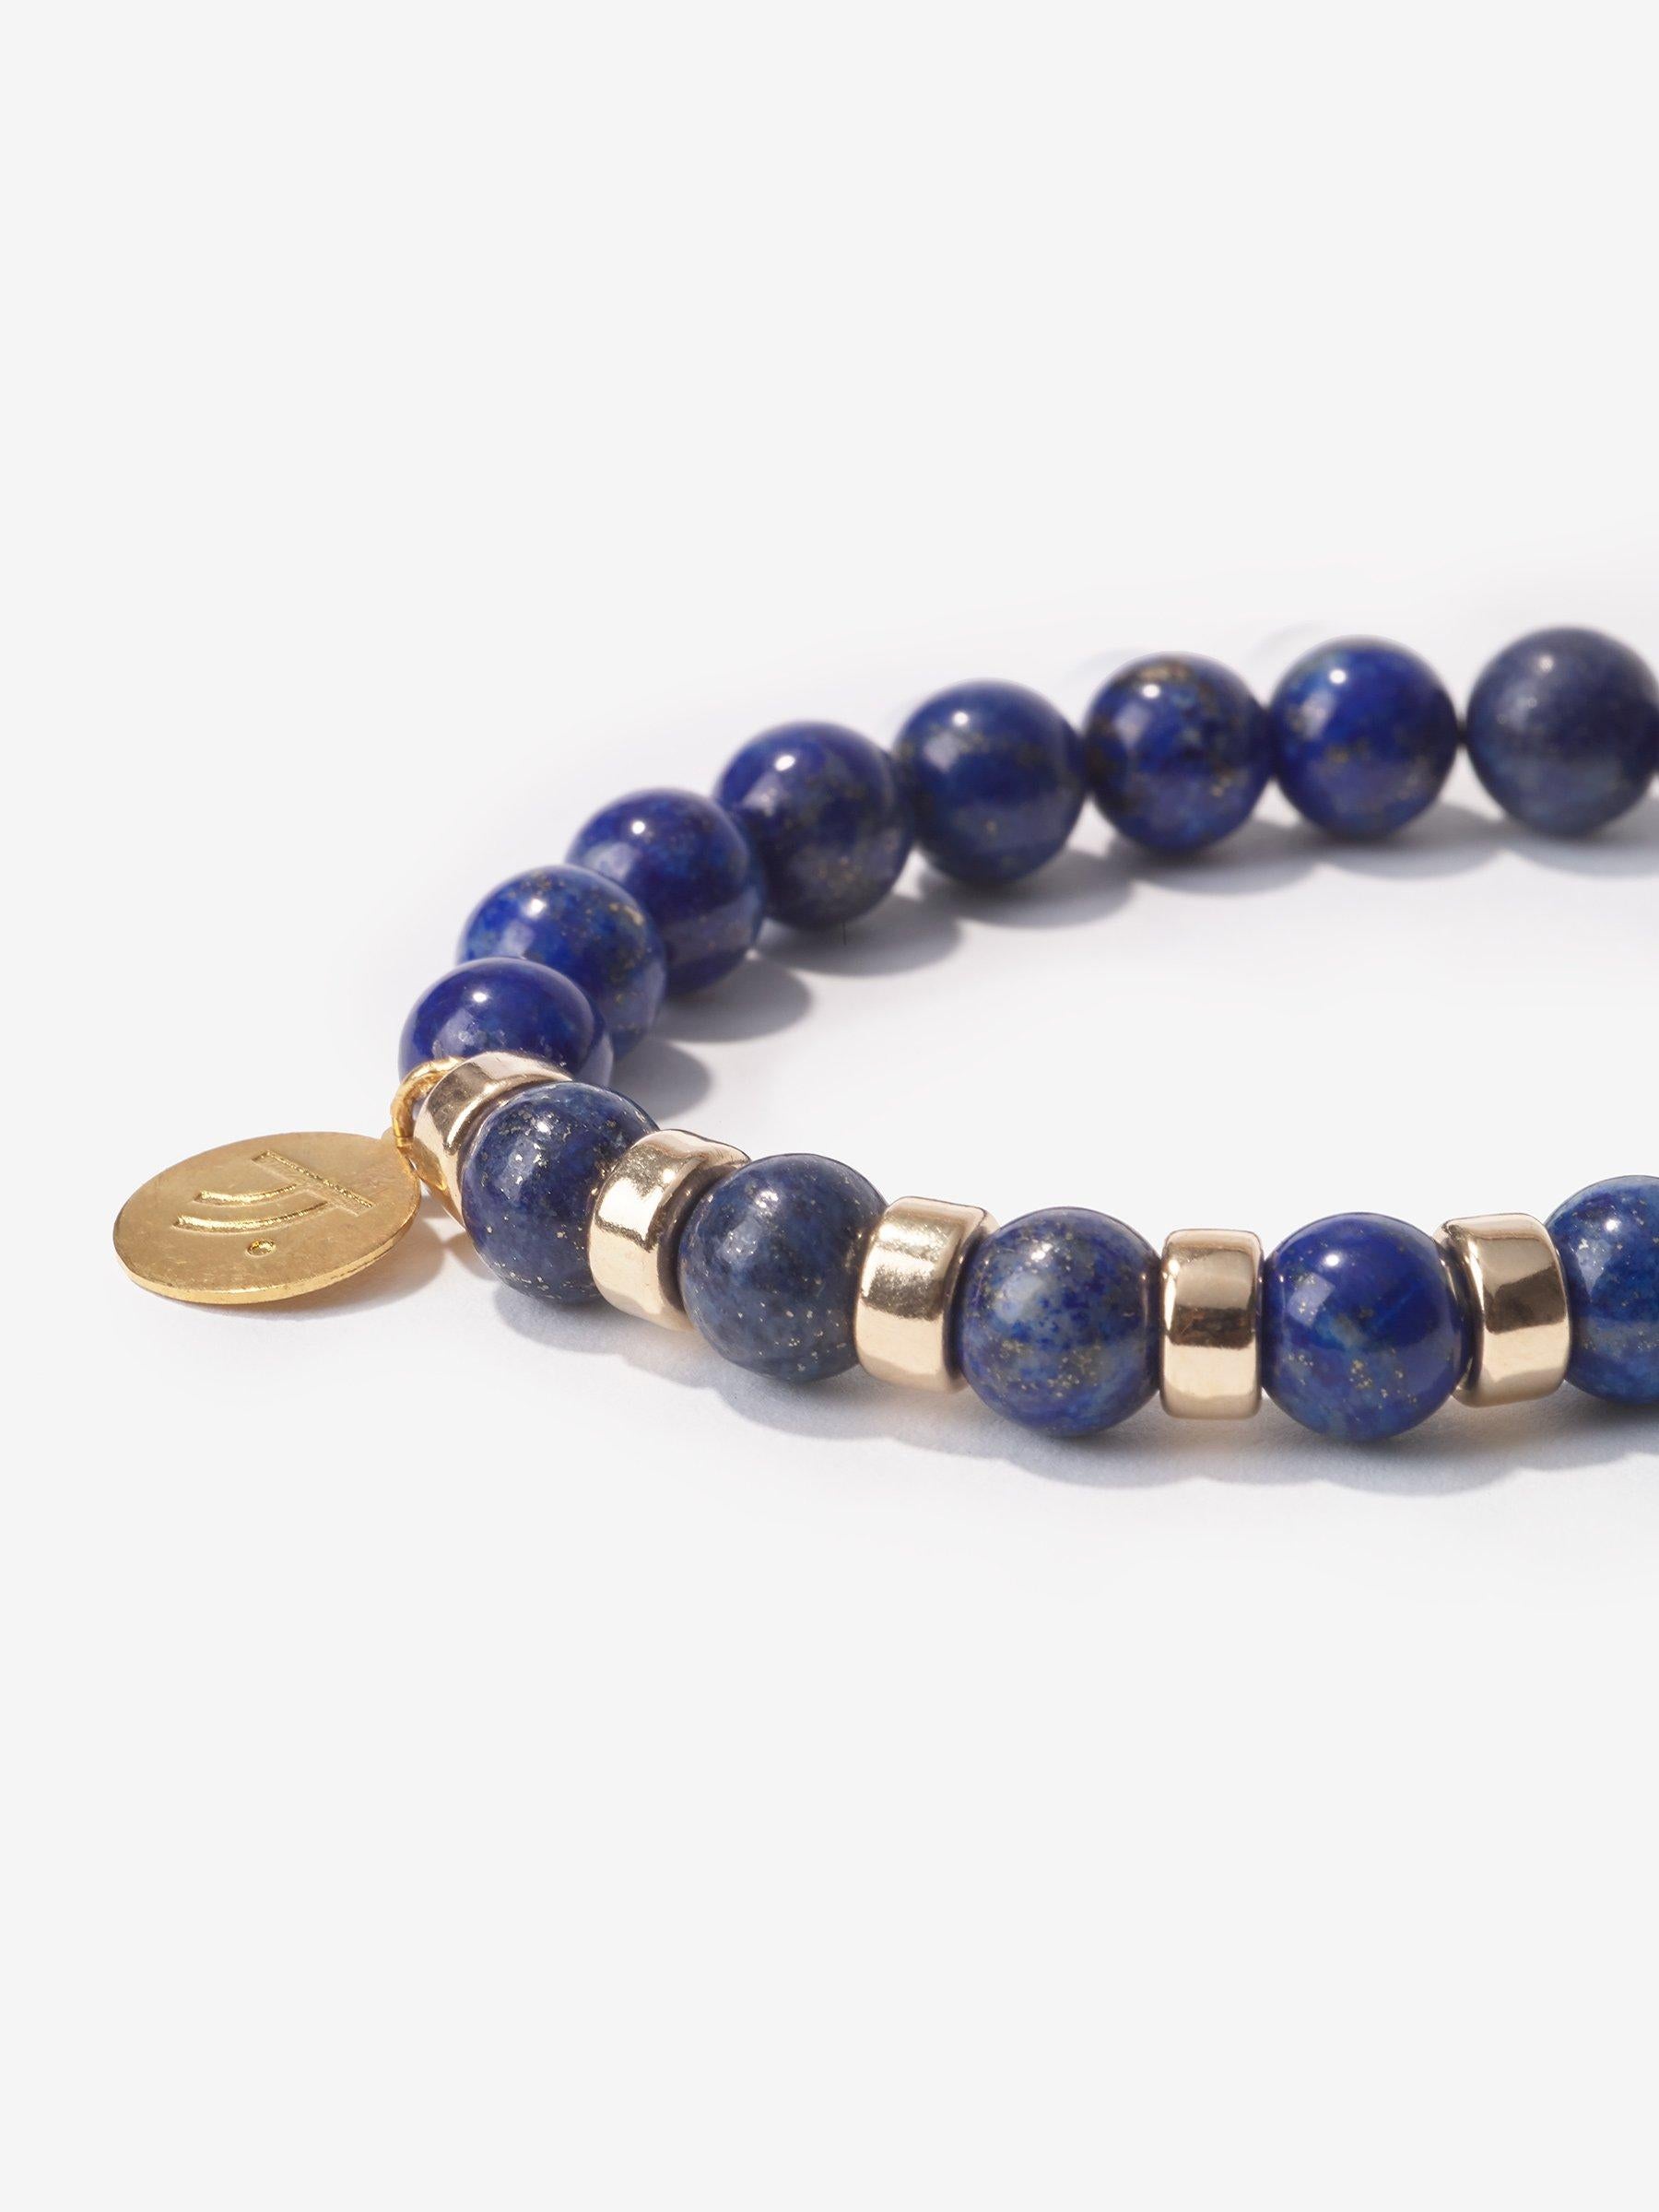 A stand alone or stackable bracelet has become a favorite for its deep blue Lapis stone. The bracelet is name after Morocco's famous Blue City, Chefchaoen.  Lapis is a deep celestial blue and has long represented truth and wisdom. It also invokes